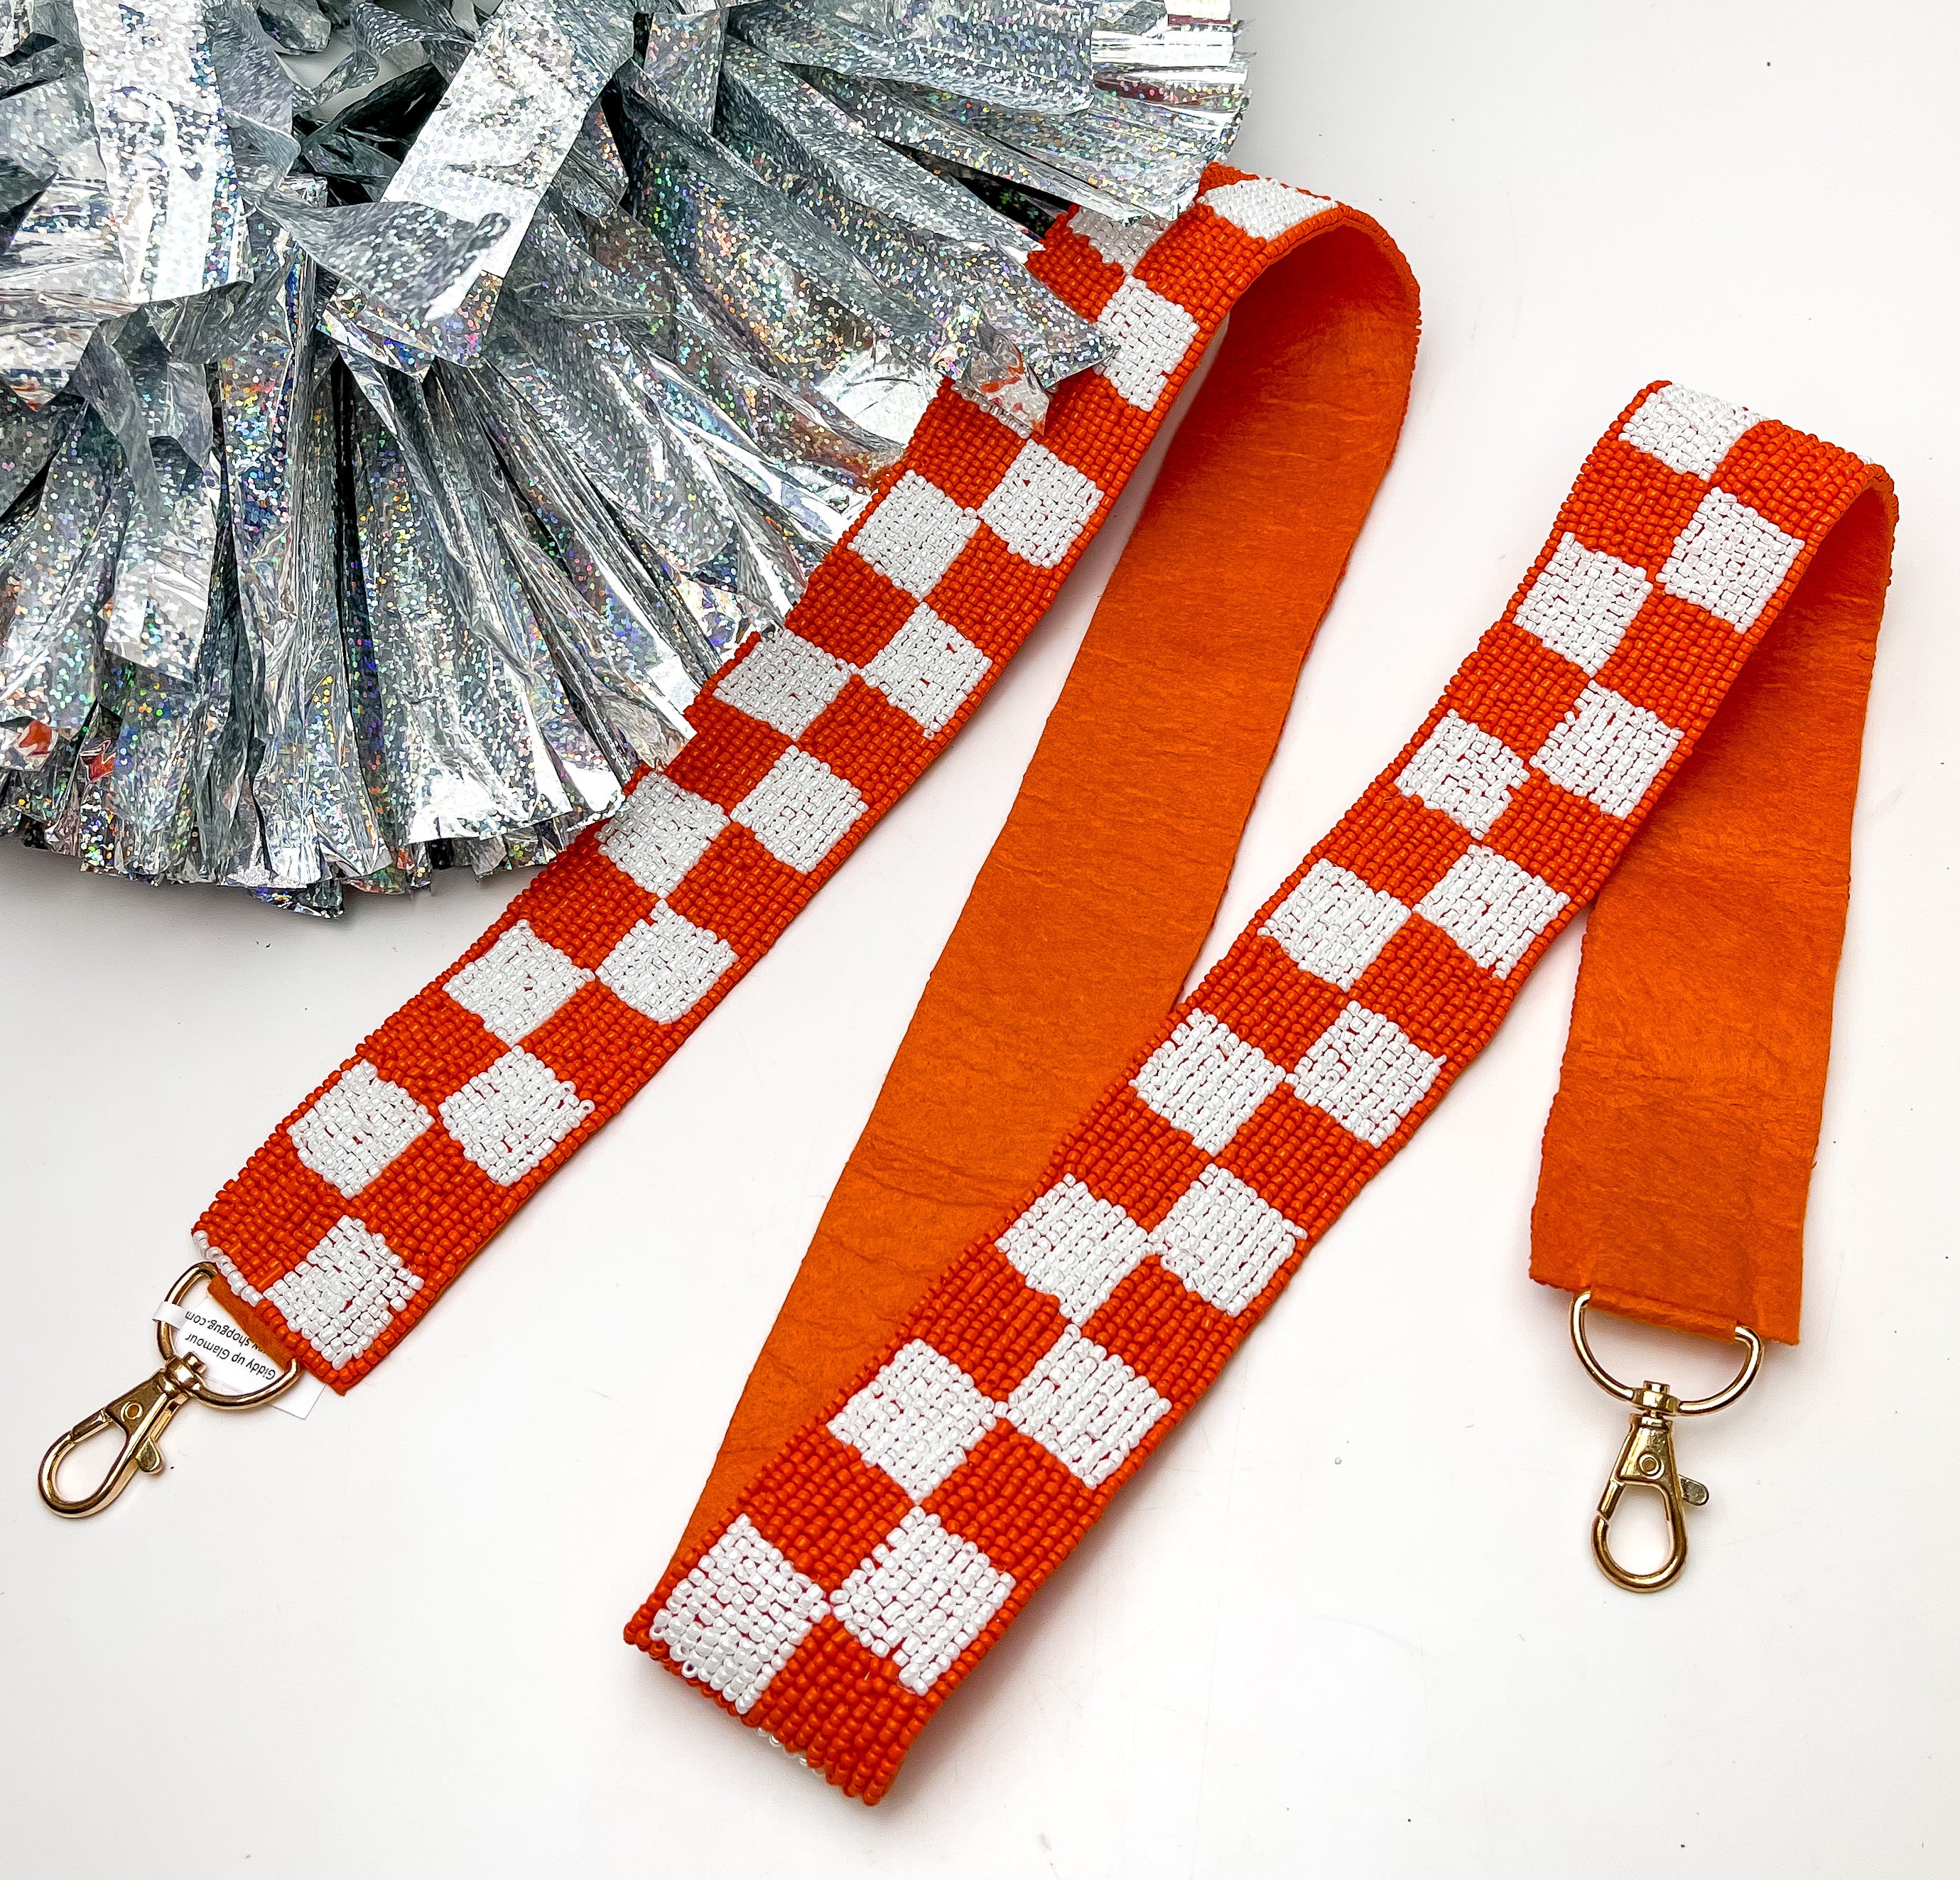 Game Day! Checkered Beaded Purse Strap in Orange and White. This purse strap is pictured on a white background with a silver pom pom next to it.